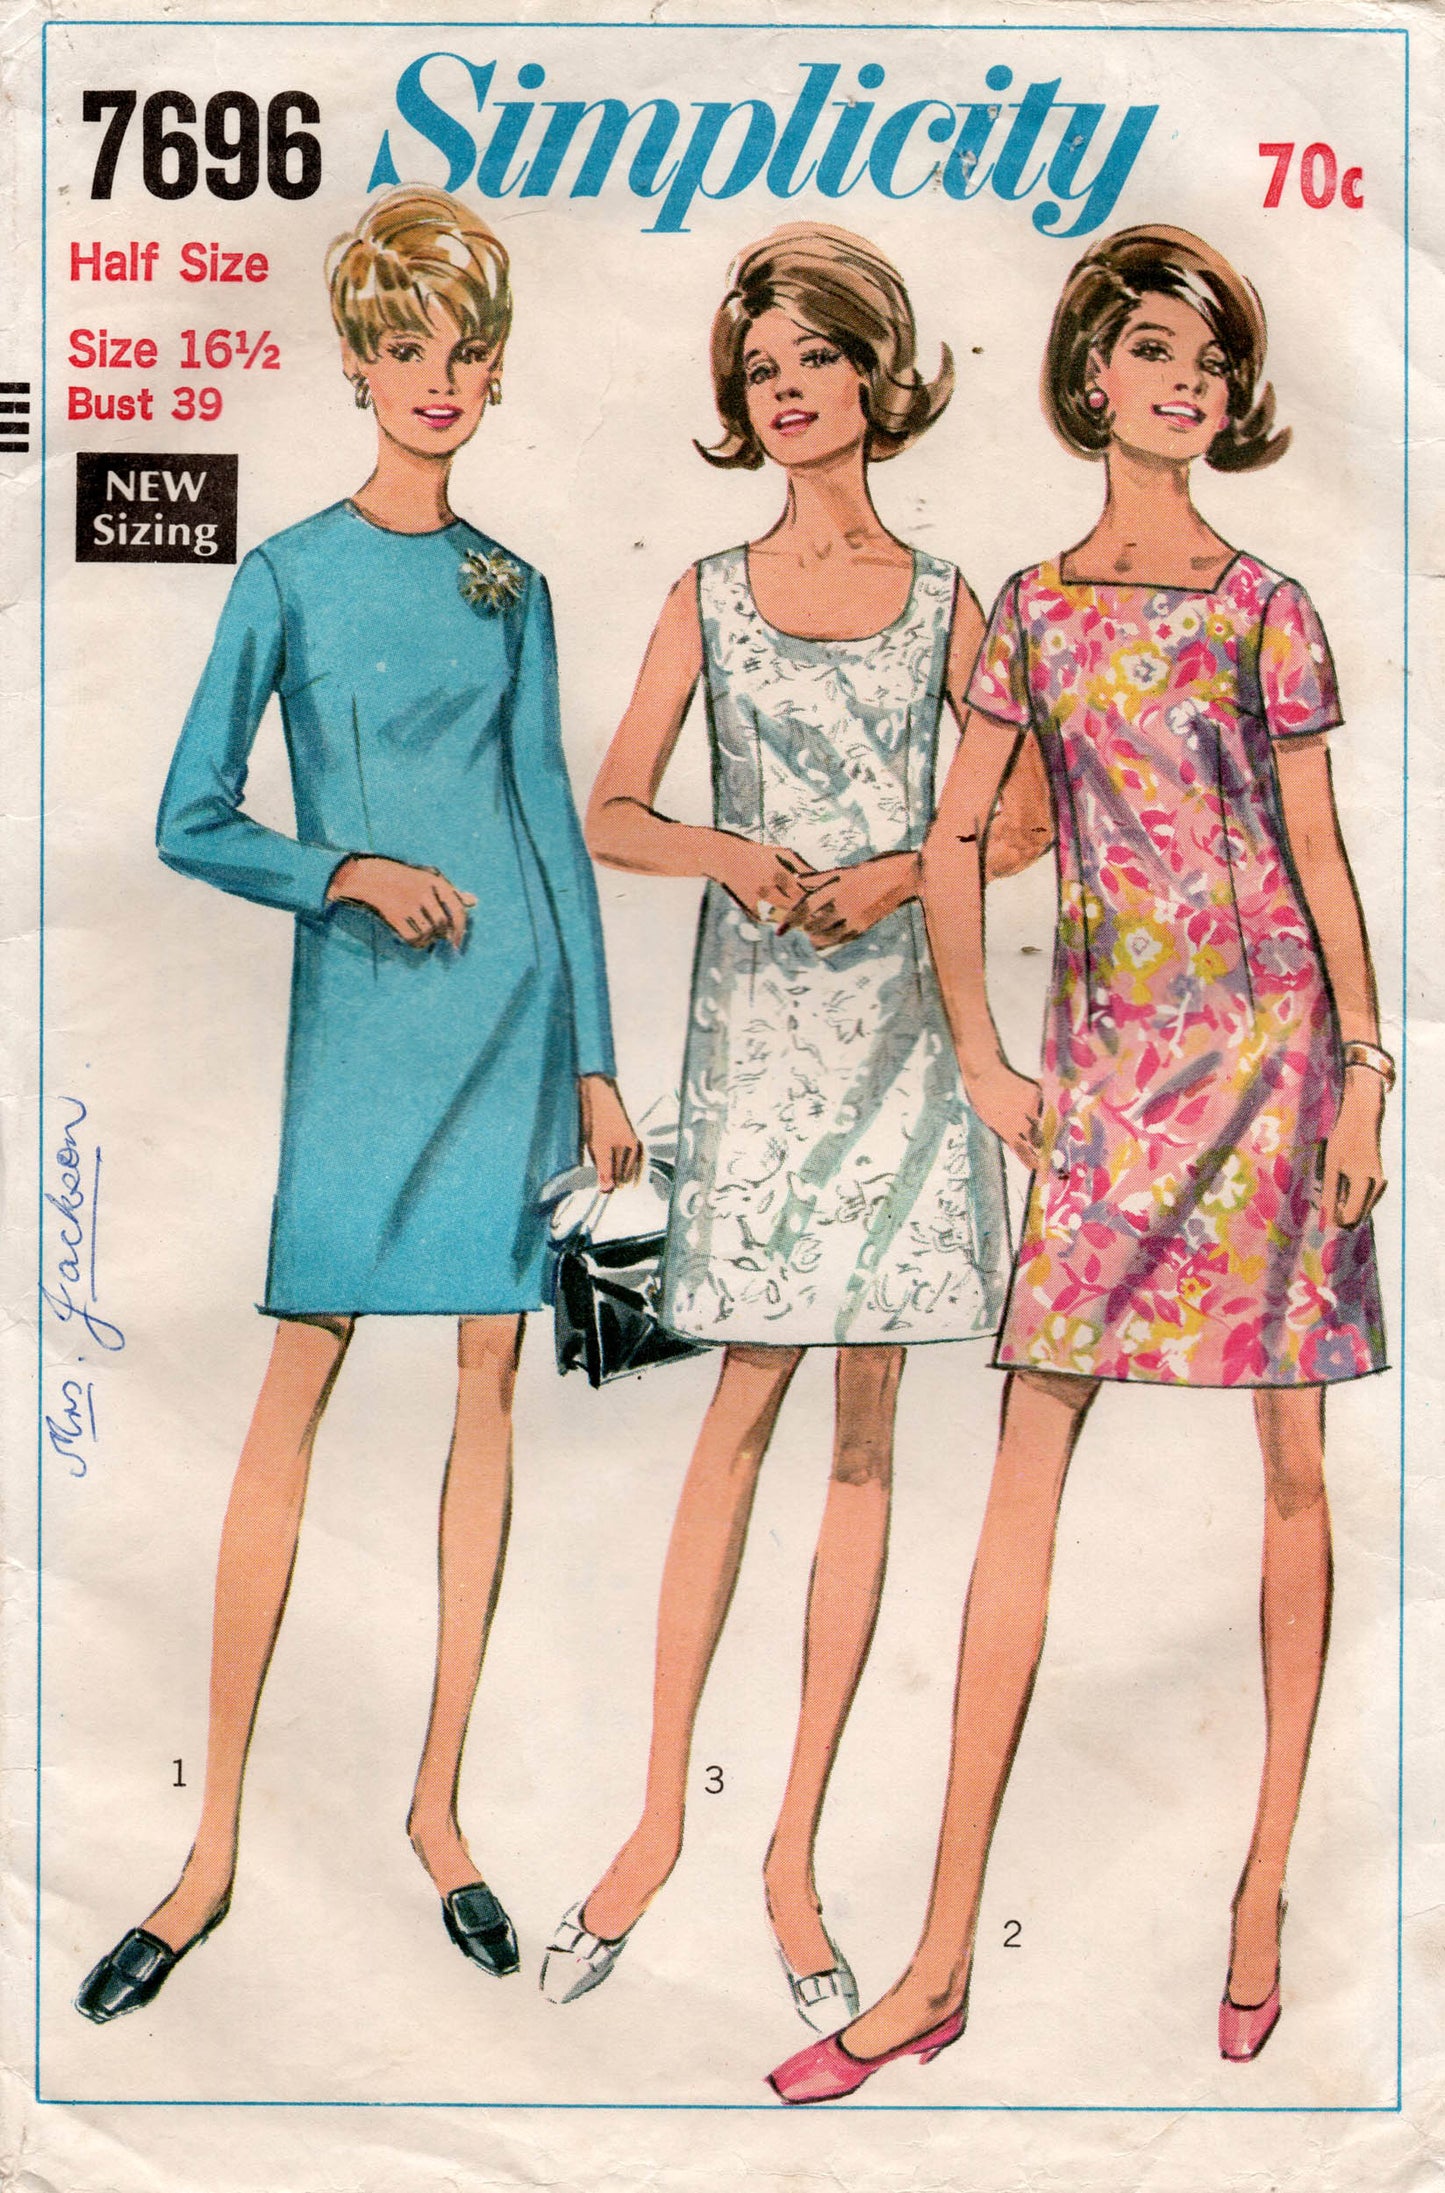 Simplicity 7696 Womens Half Size Shift Dresses 1960s Vintage Sewing Pattern Bust 39 inches